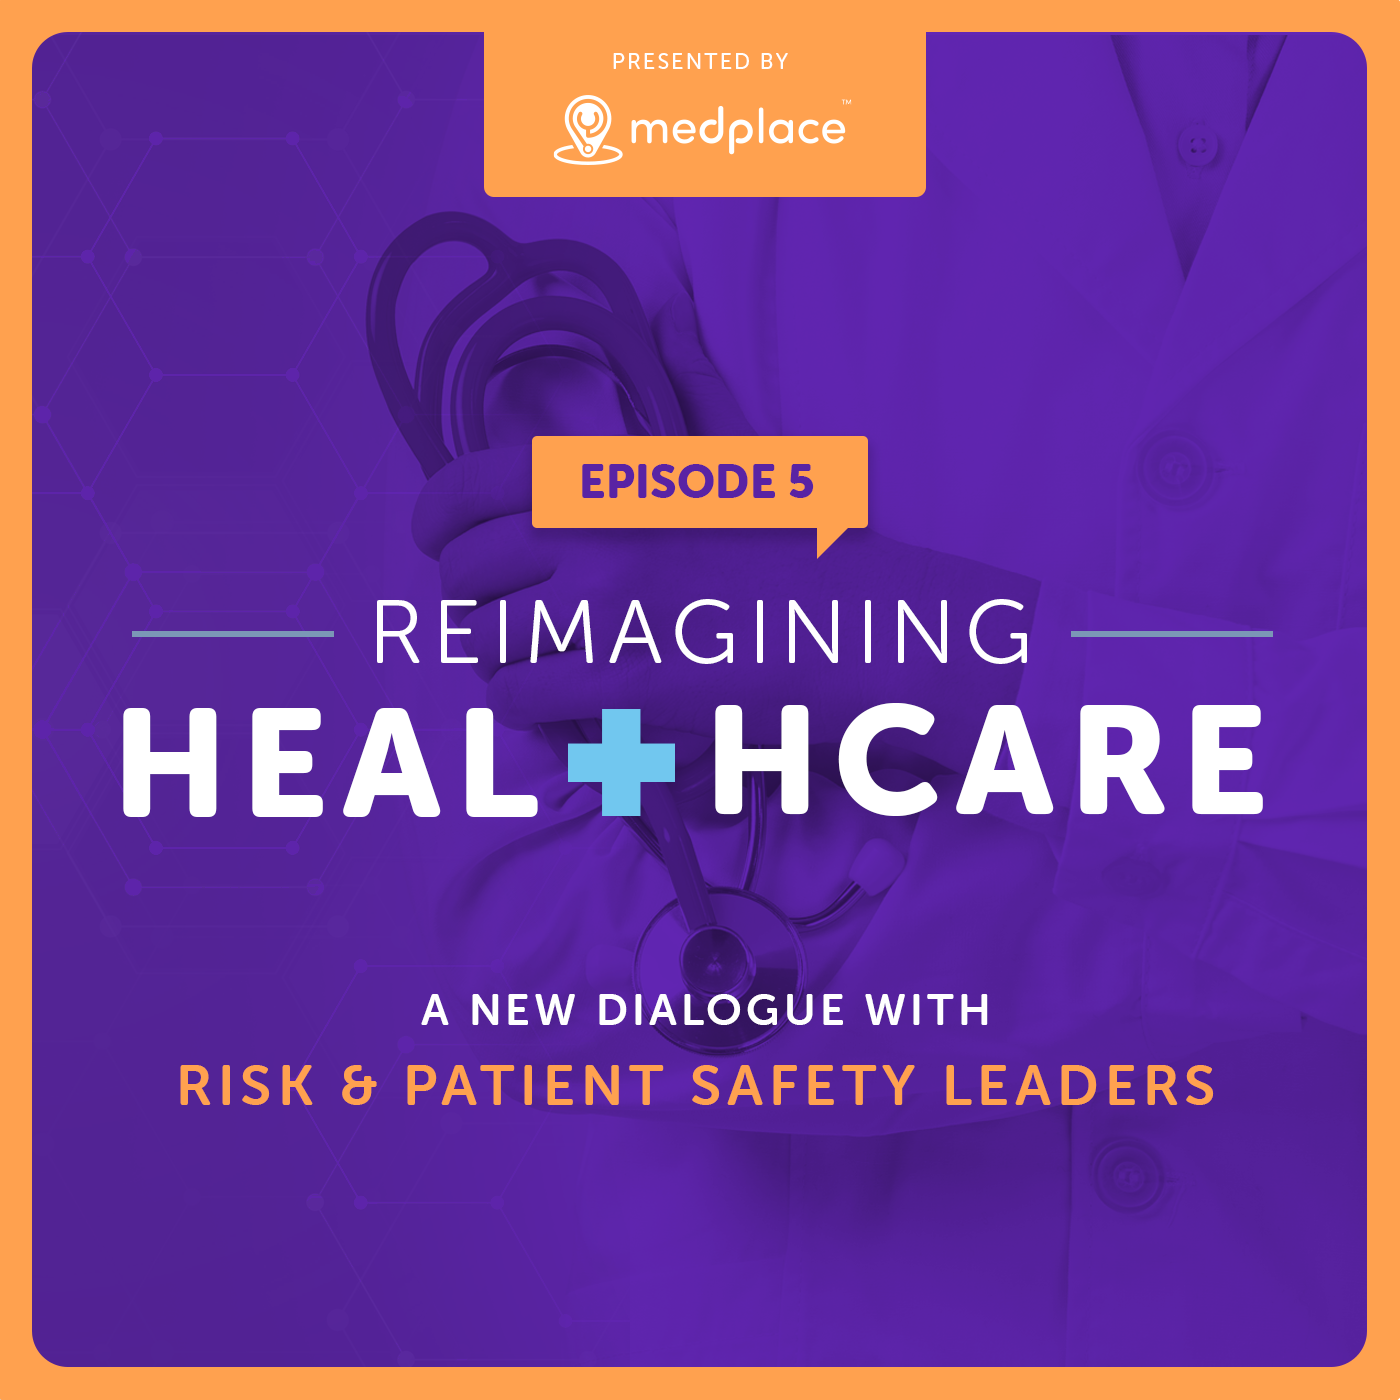 Episode 5 - Reimagining Healthcare - A New Dialogue with Risk and patient Safety Leaders